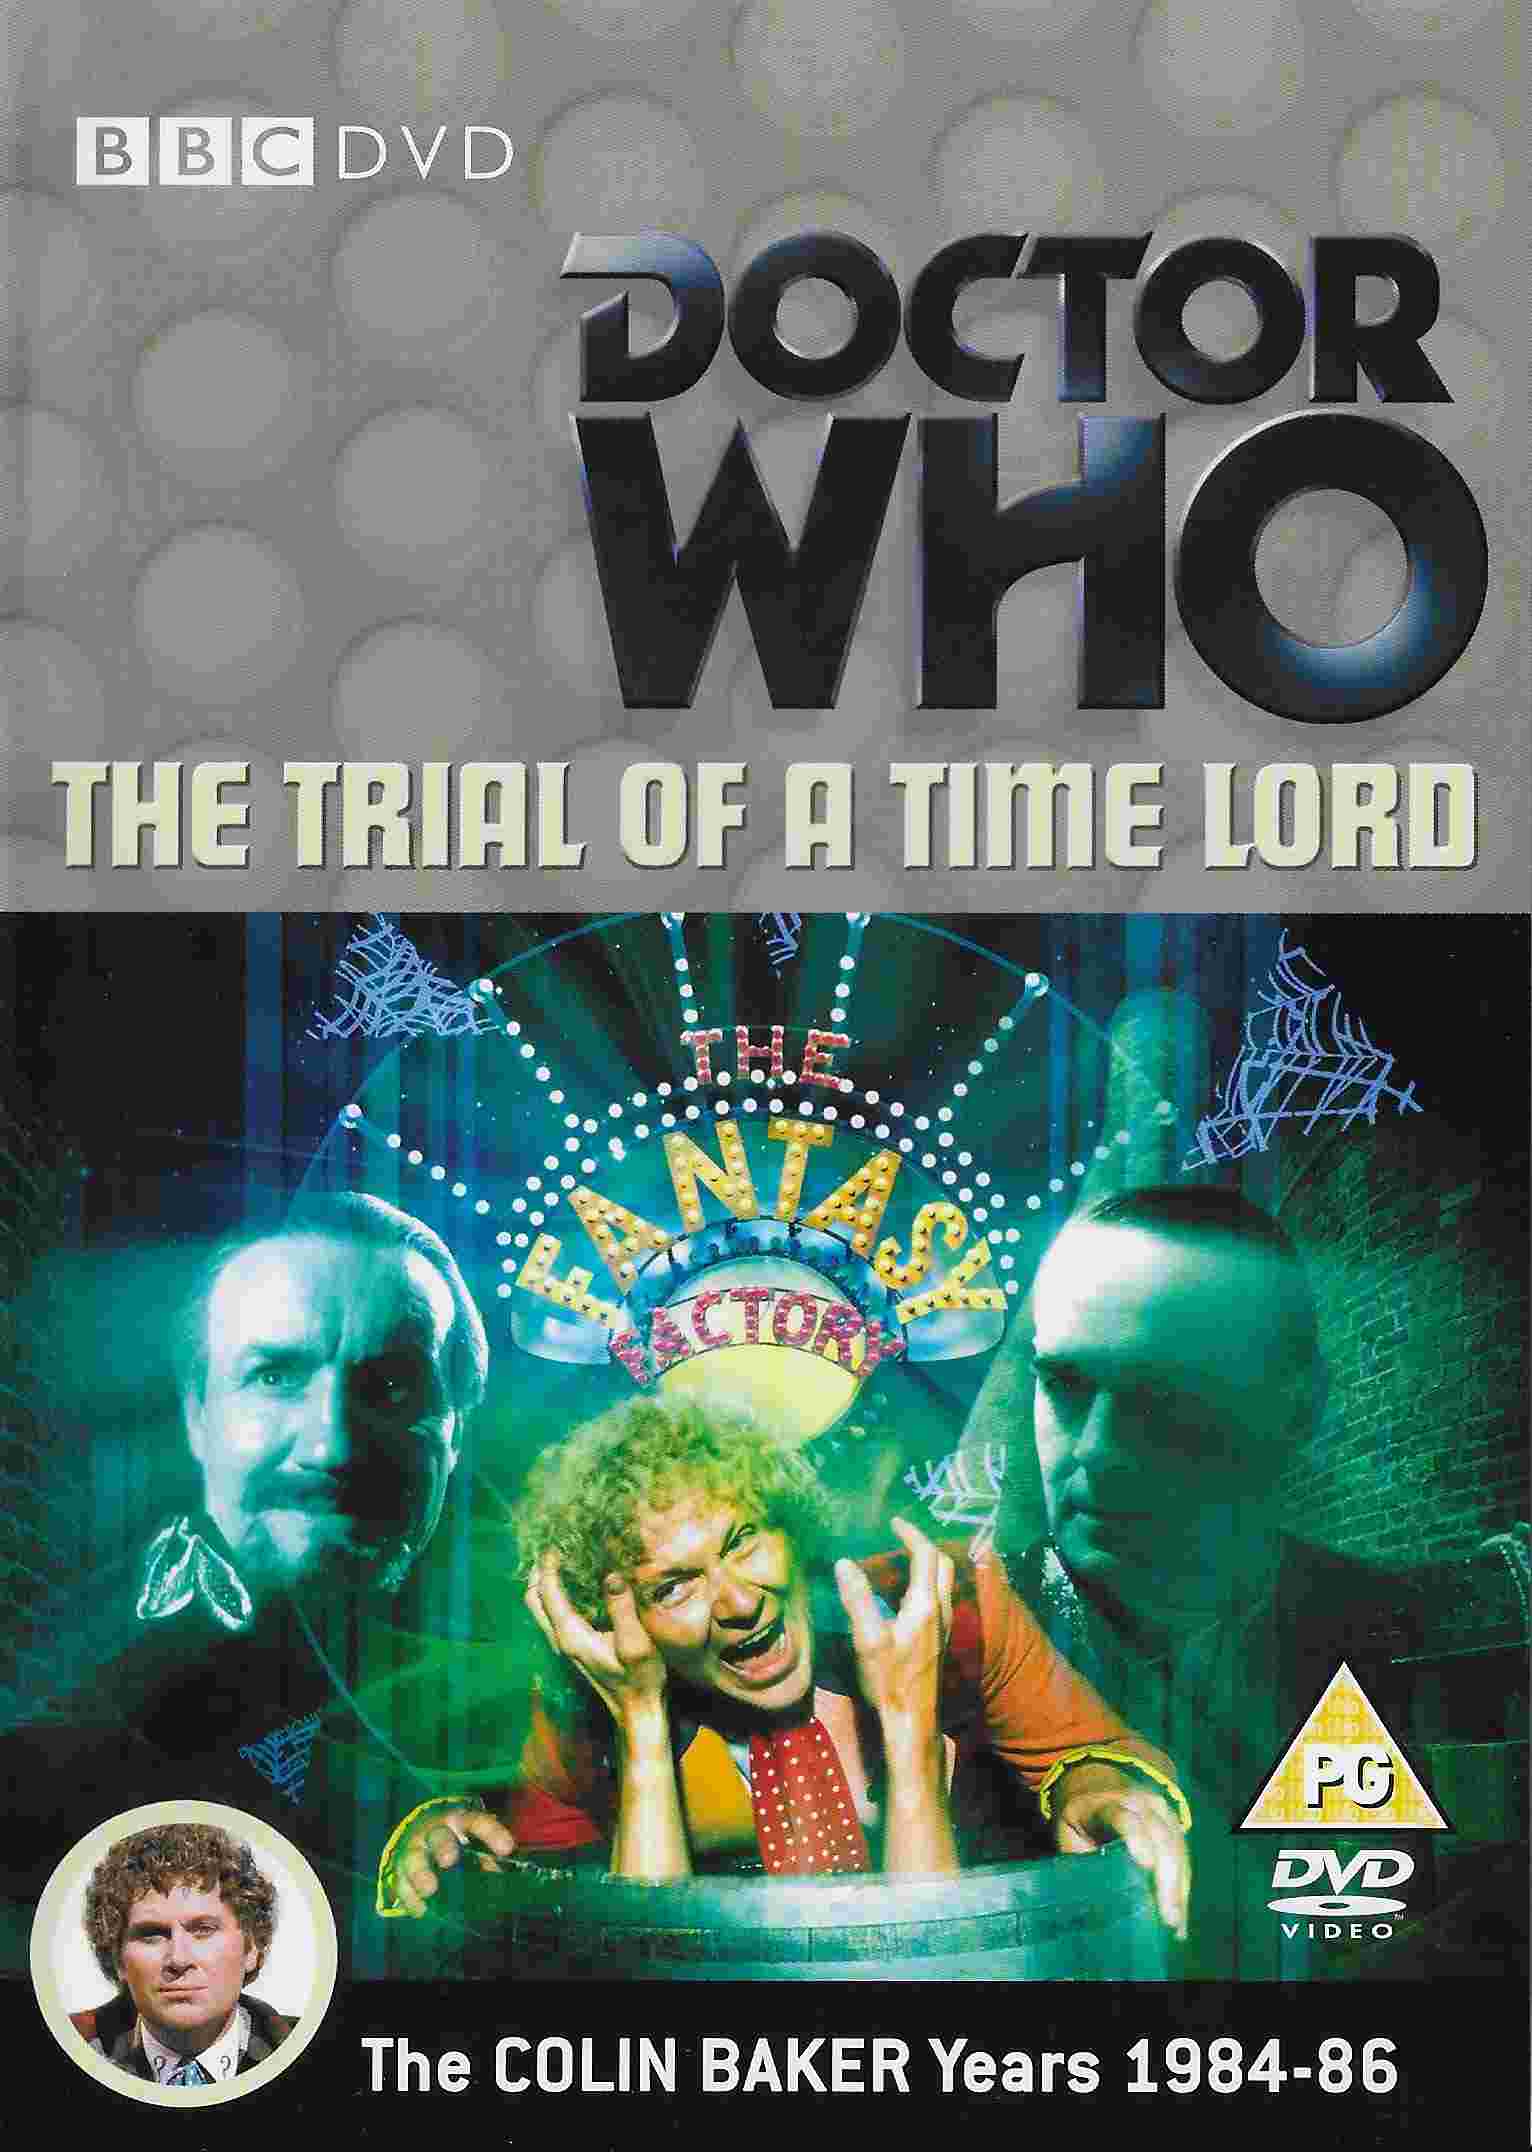 Picture of BBCDVD 2422D Doctor Who - The trial of a Time Lord - Parts 13-14 - The Ultimate Foe by artist Robert Holmes / Pip and Jane Baker from the BBC dvds - Records and Tapes library